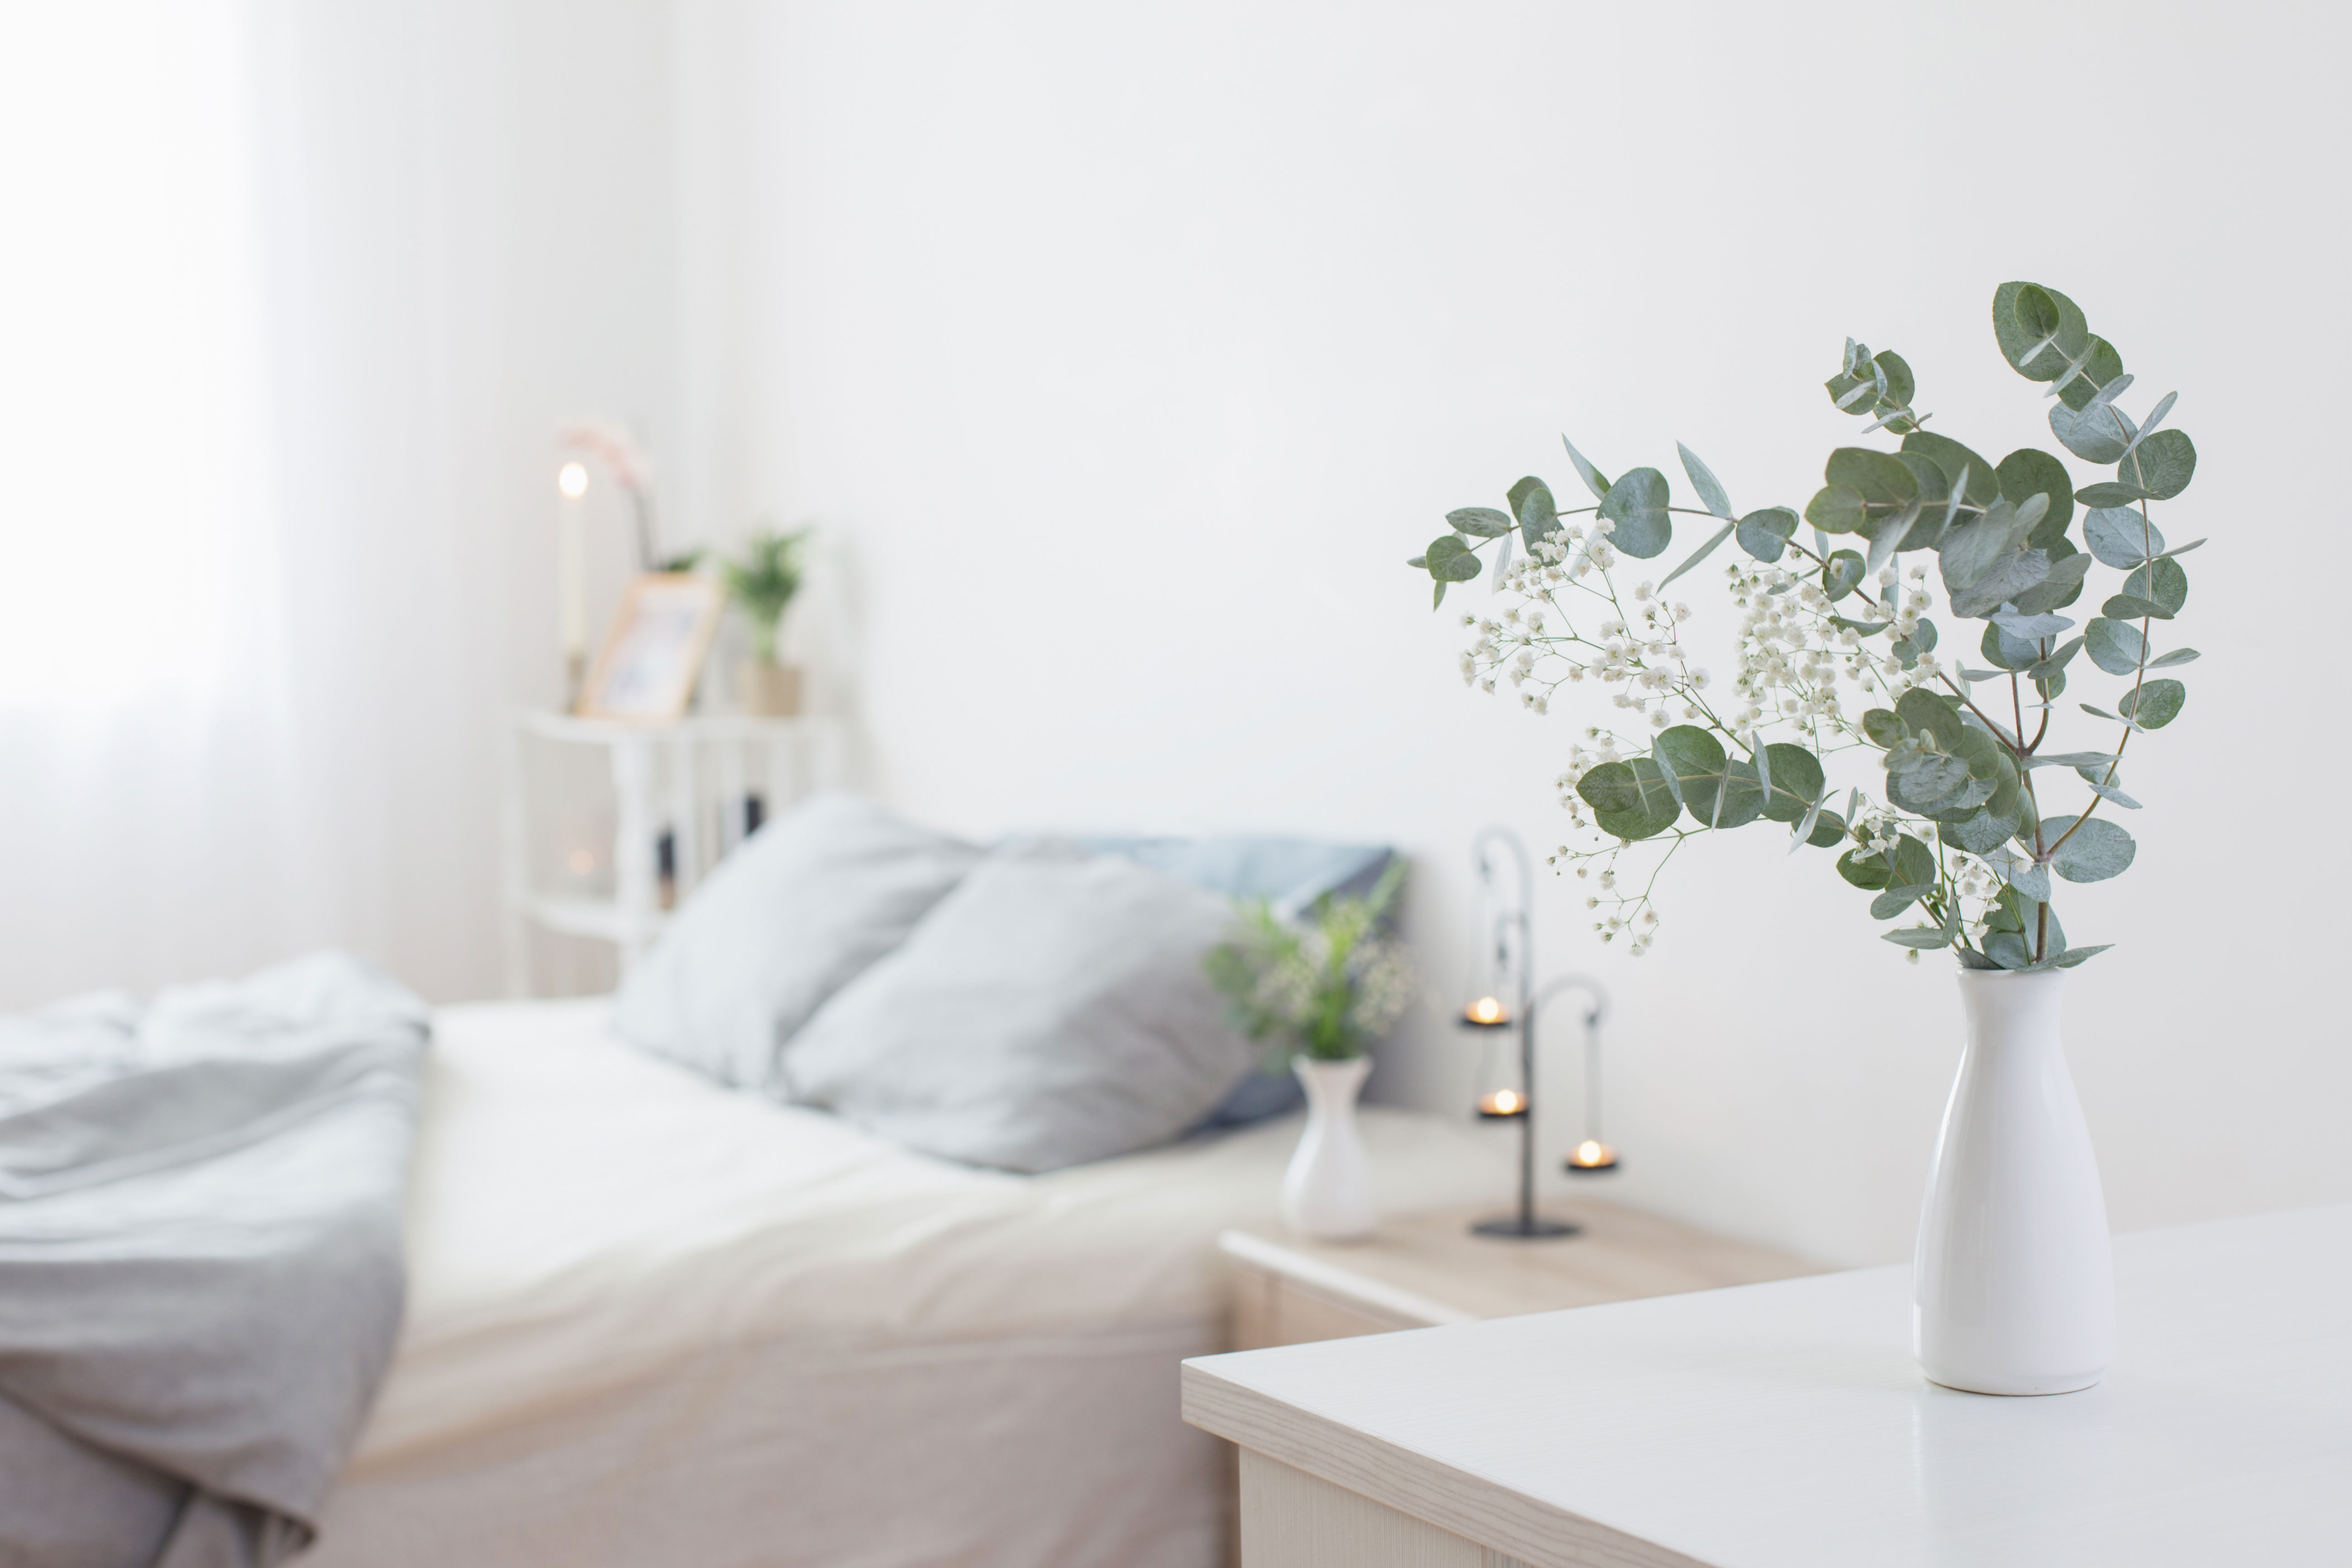 eucalyptus-and-gypsophila-in-vase-in-white-bedroom-with-gold-accents-in-background